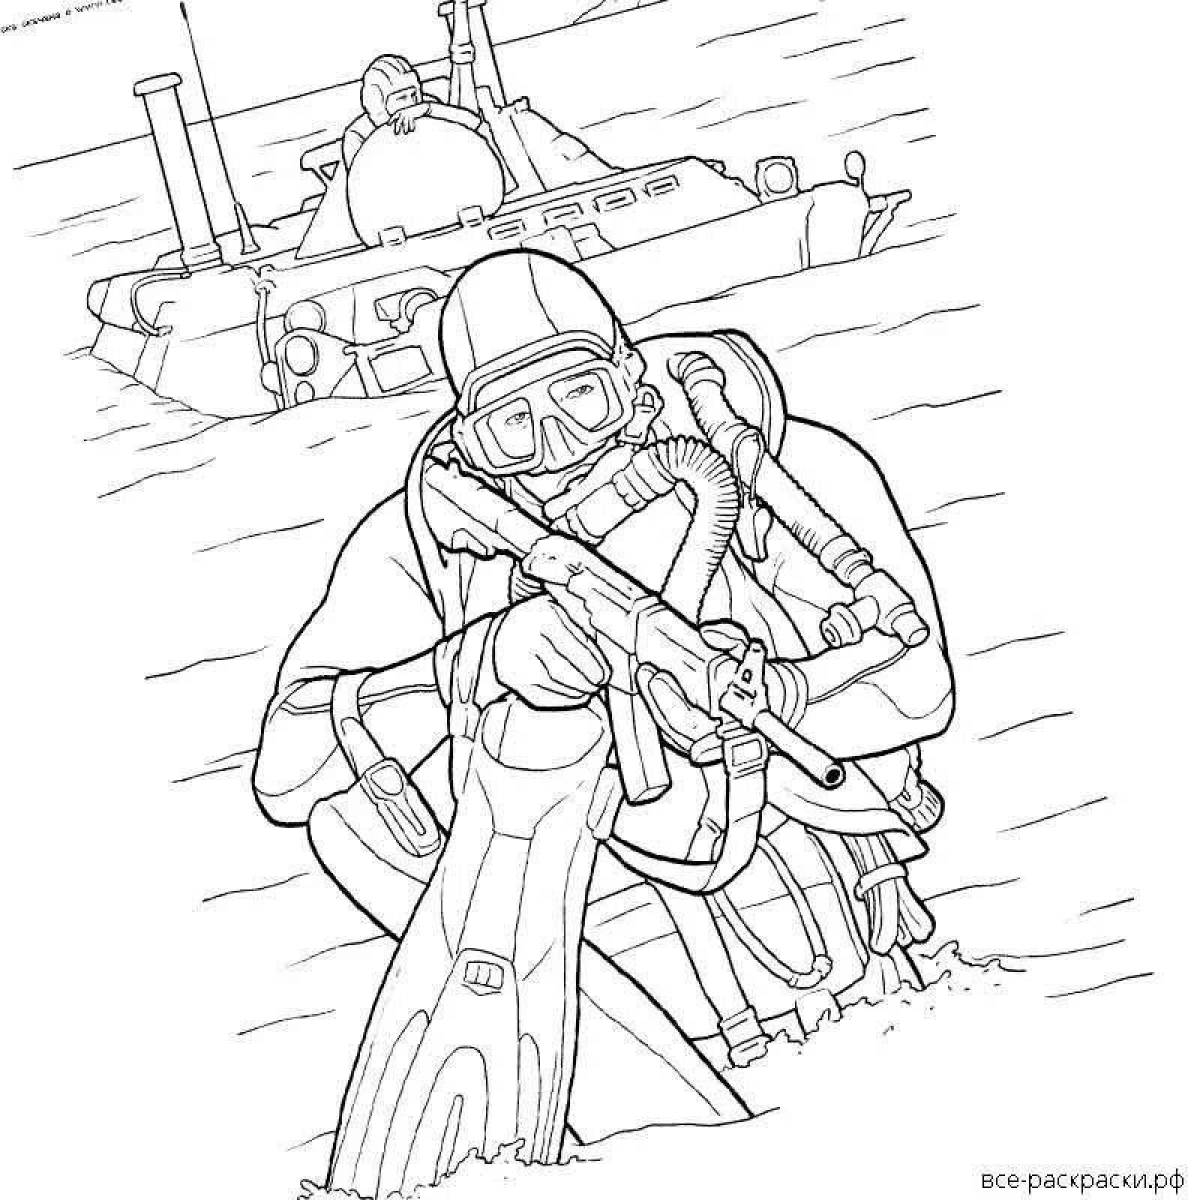 Coloring page brave Russian soldier